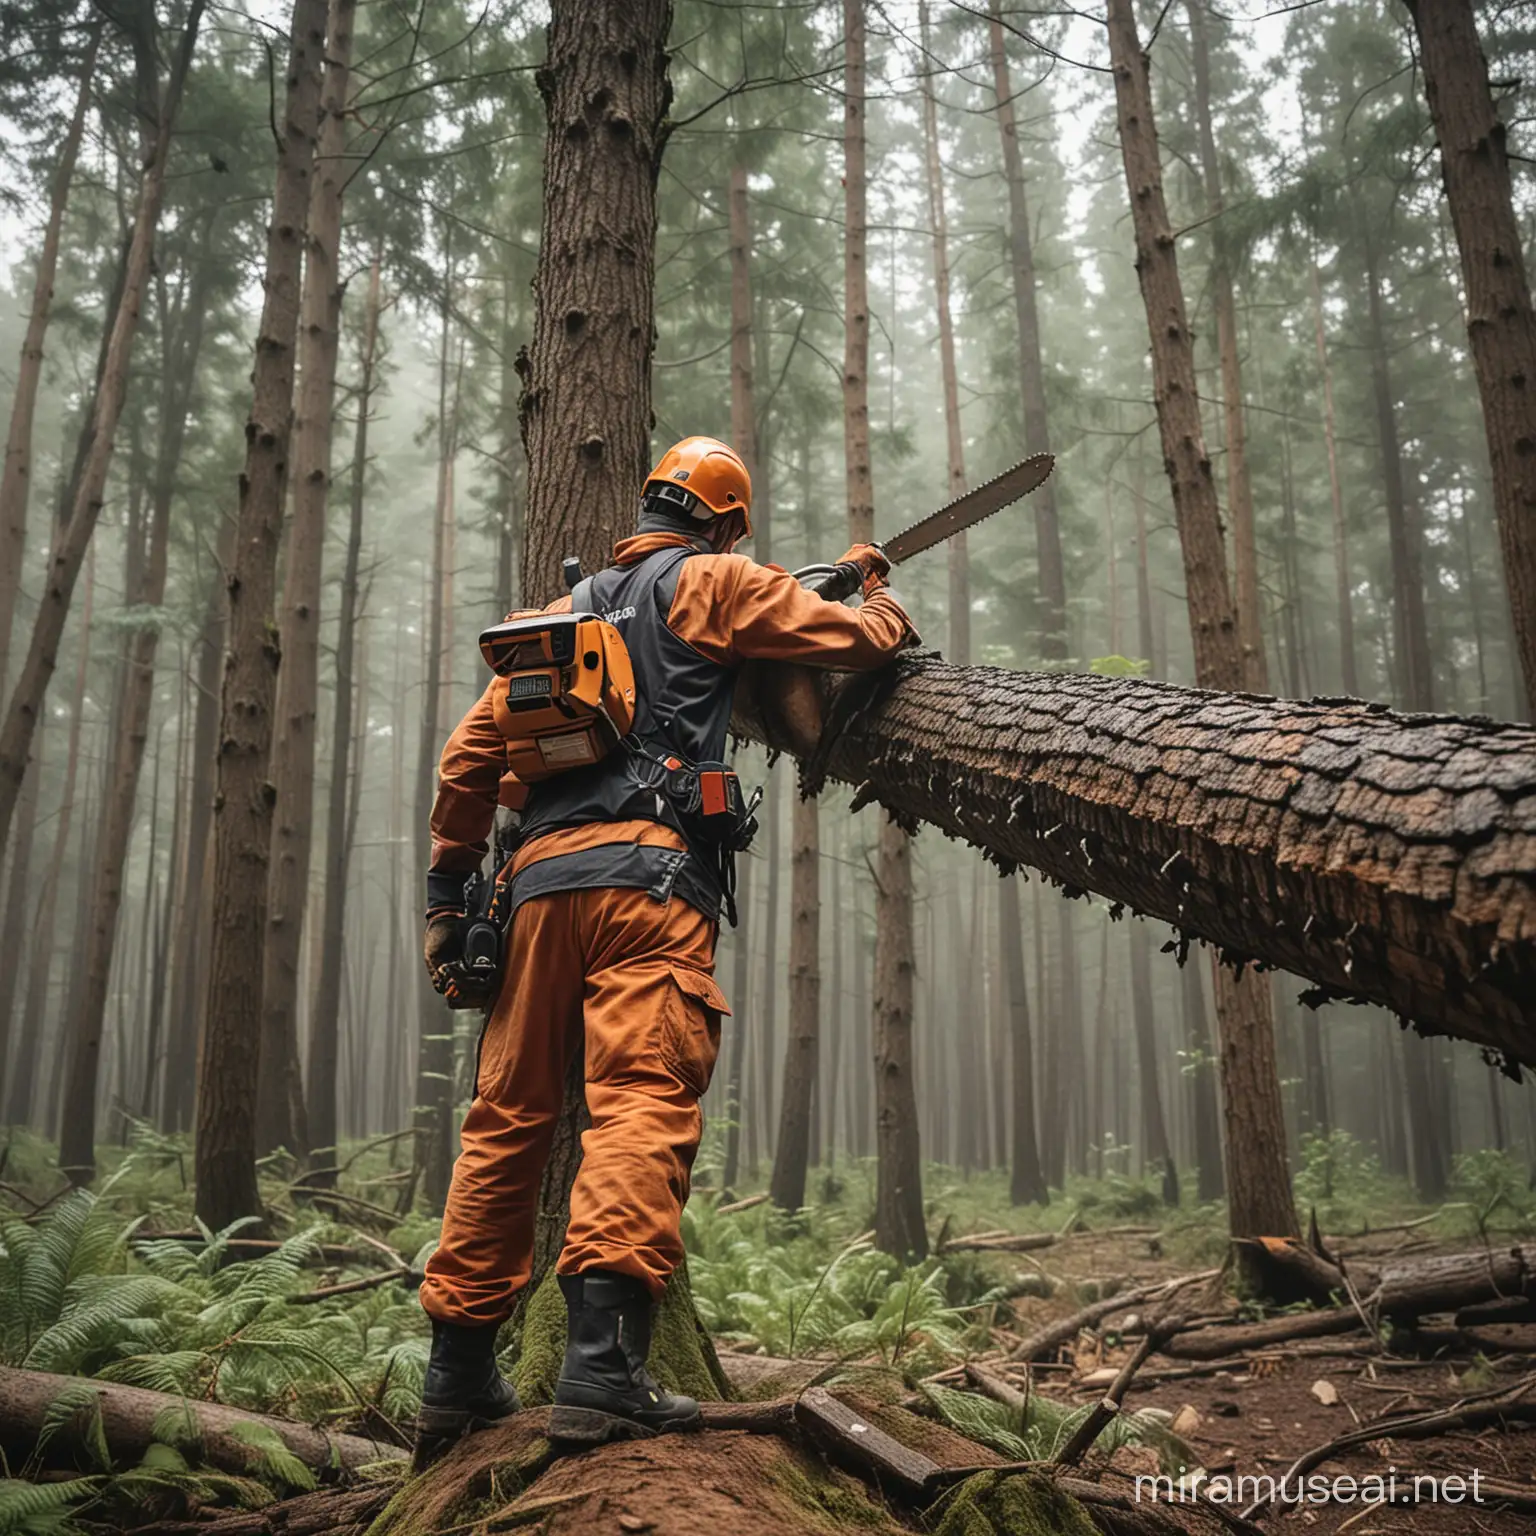  standing on two straight legs a chainsaw operator stretches one hand above shoulder level, to fell a big tree in the forest.